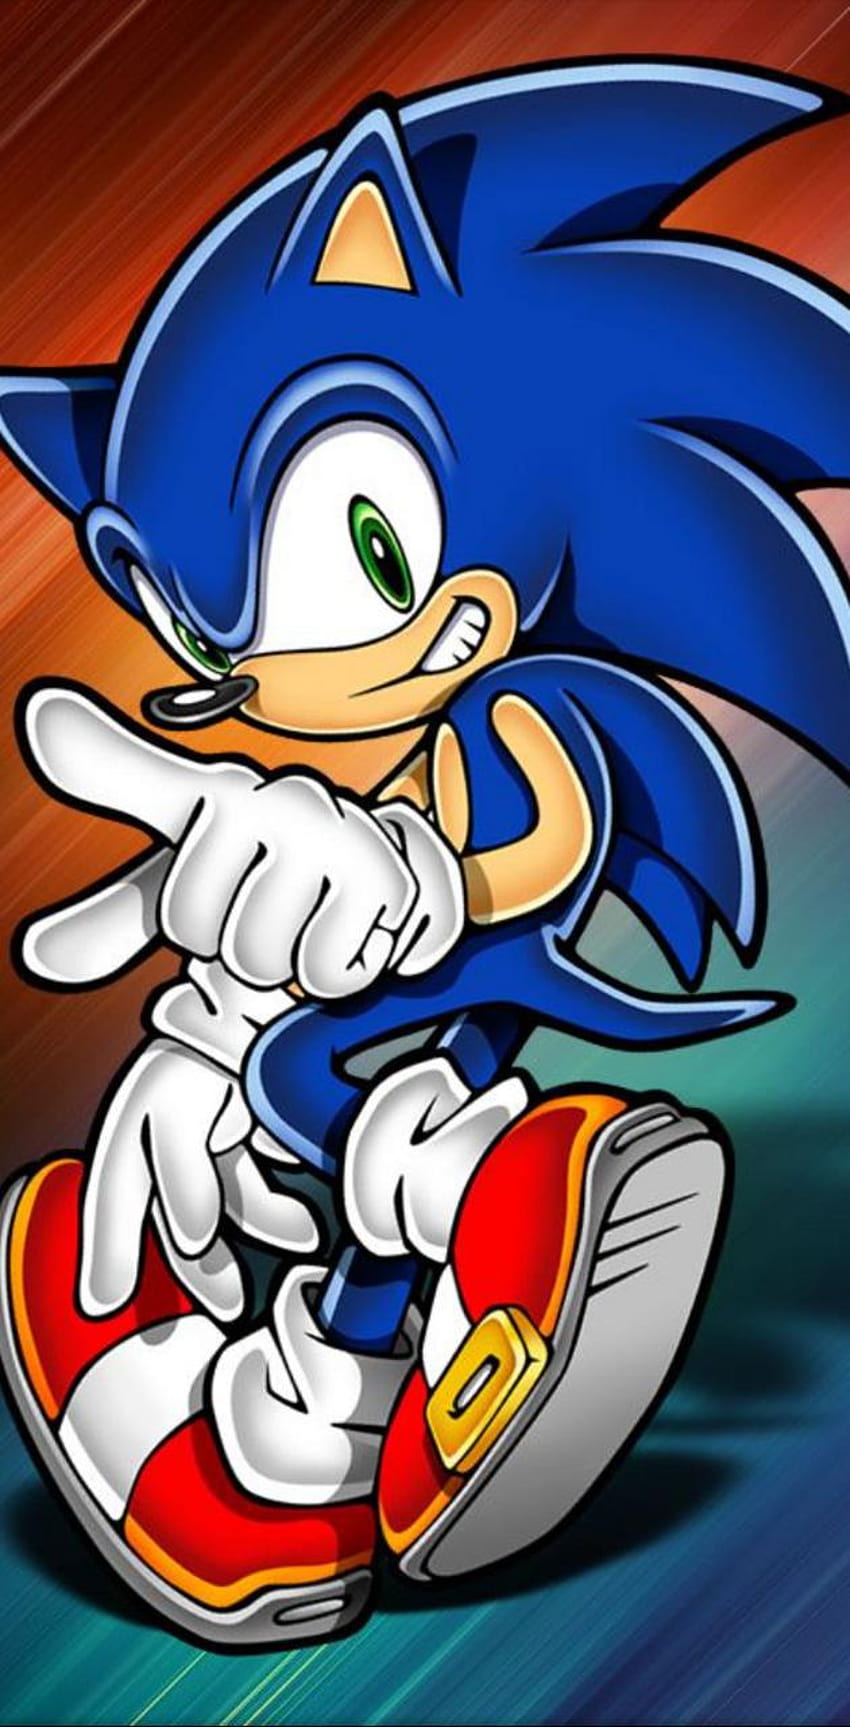 Sonic the hedgehog by Sonite907, sonic hedgedog iphone HD phone wallpaper